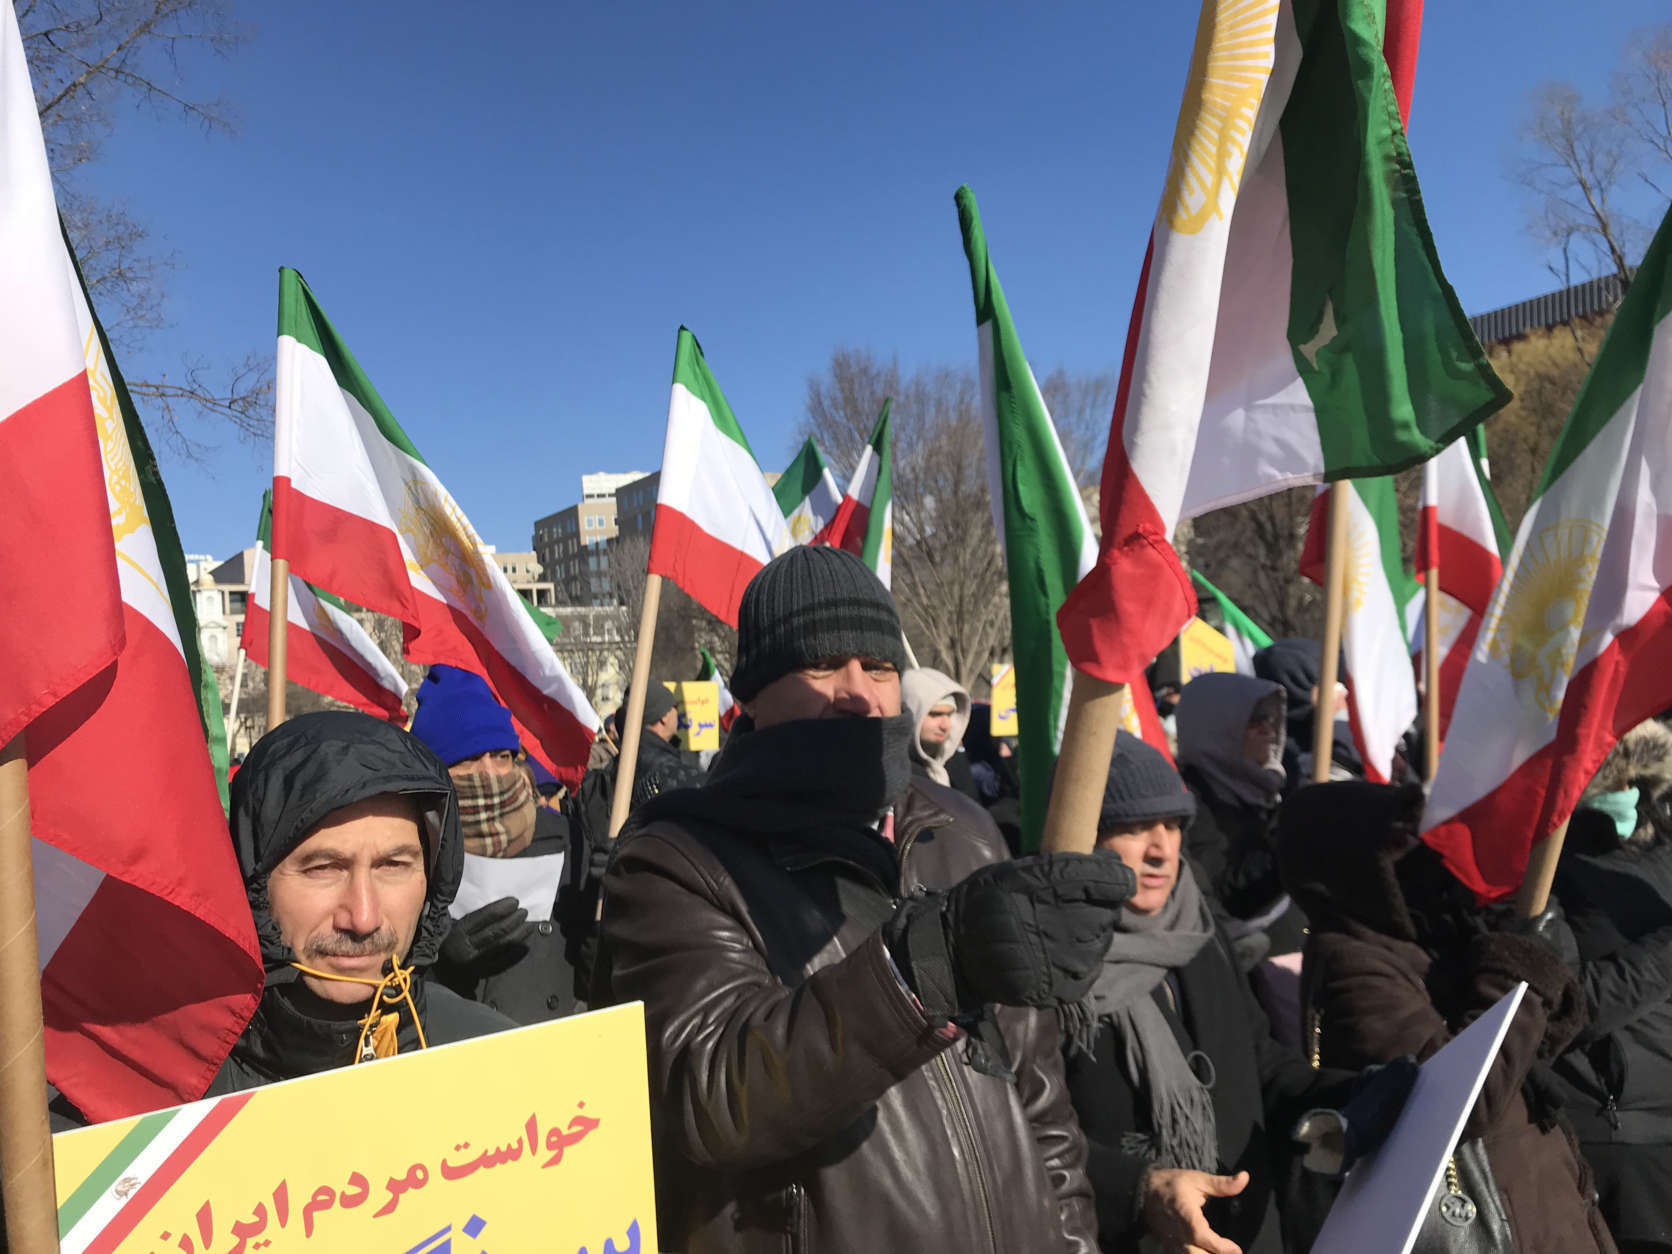 The protests in Iran began December 28 and were sparked by a jump in food prices, but went nationwide with calls to overthrow the Iranian government, according to the Associated Press. (WTOP/Dick Uliano) 